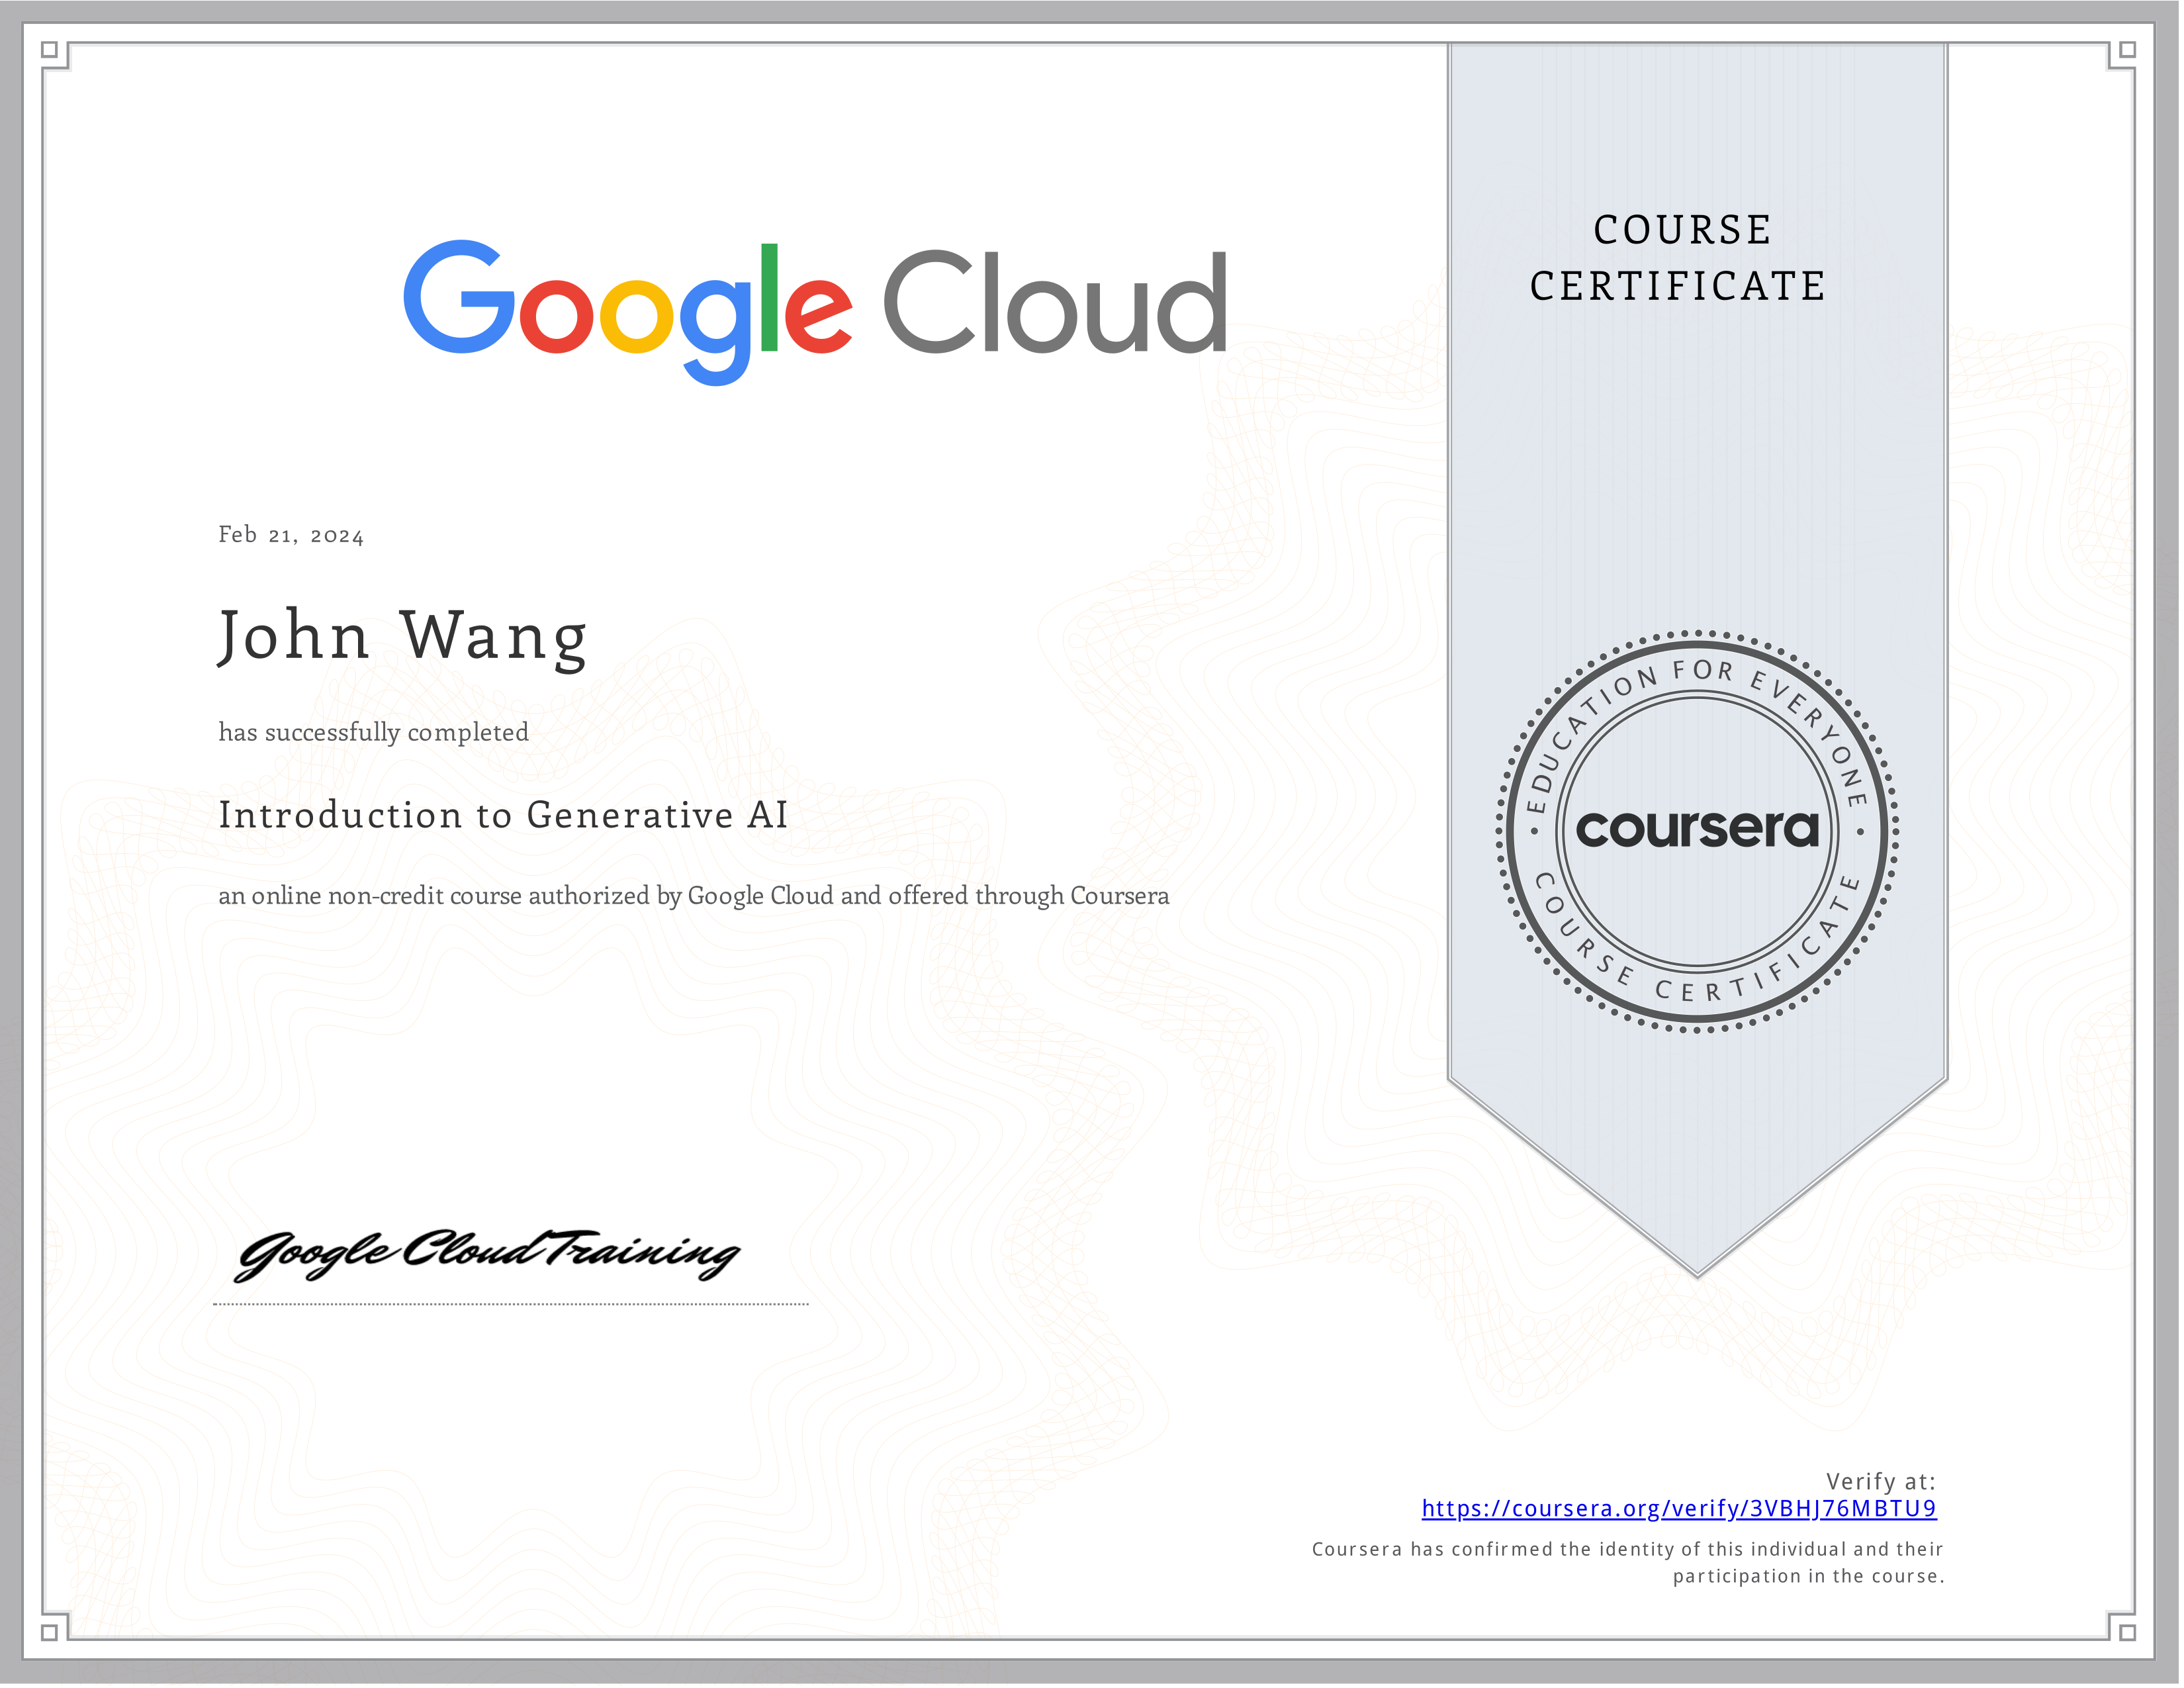 John's Introduction to Generative AI from Google Cloud